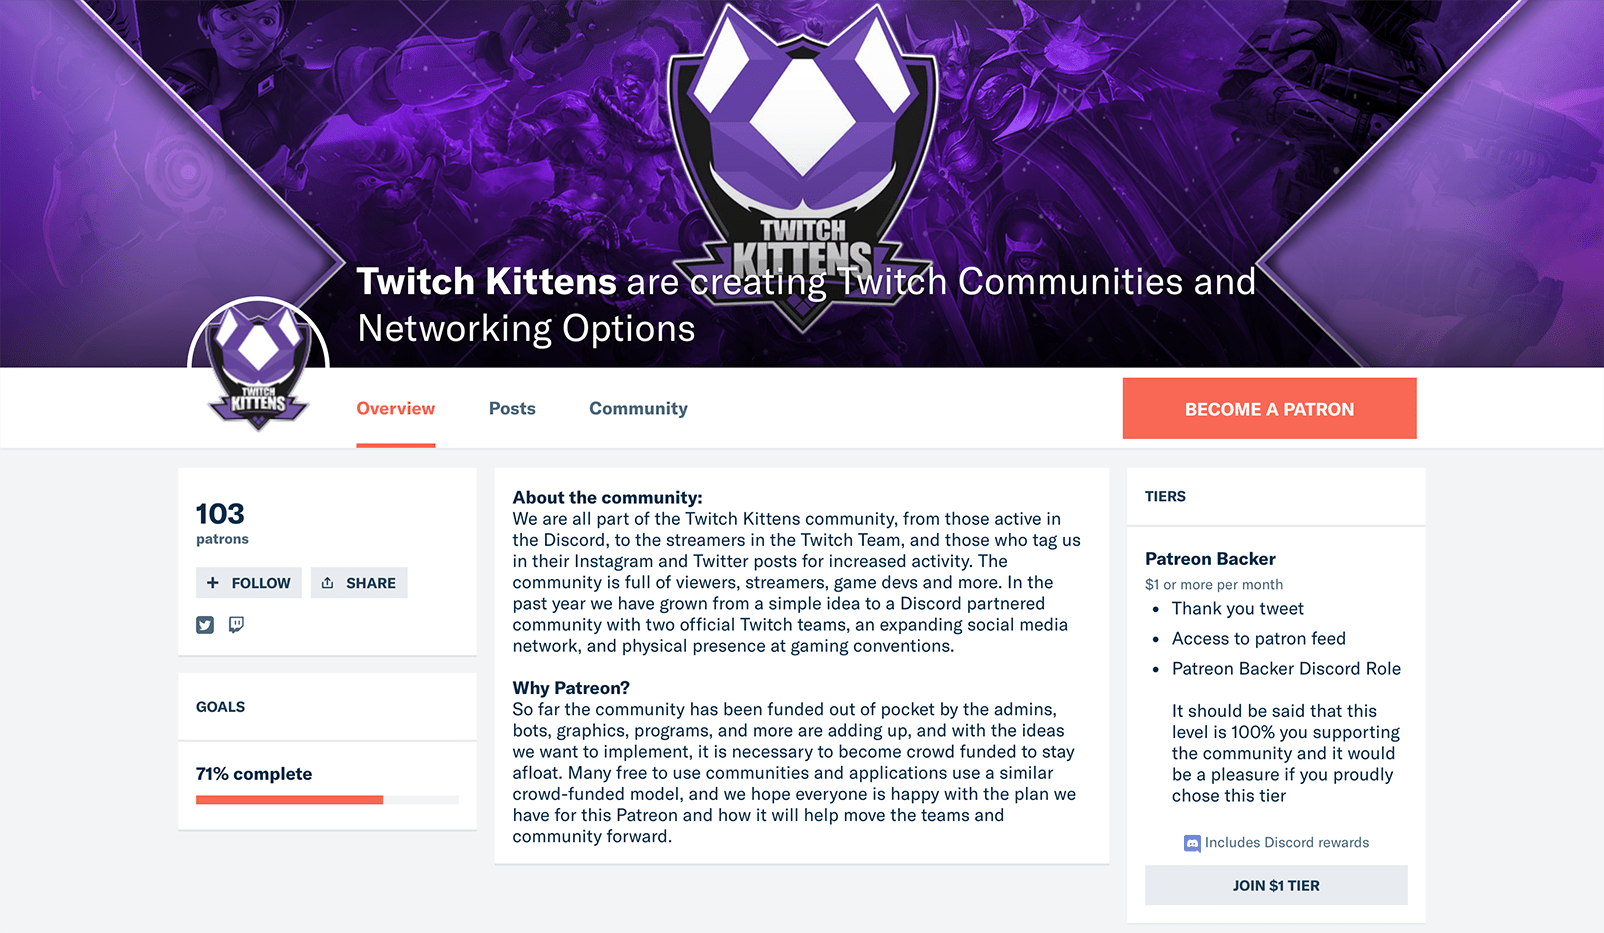 Twitch Kittens' Patreon page